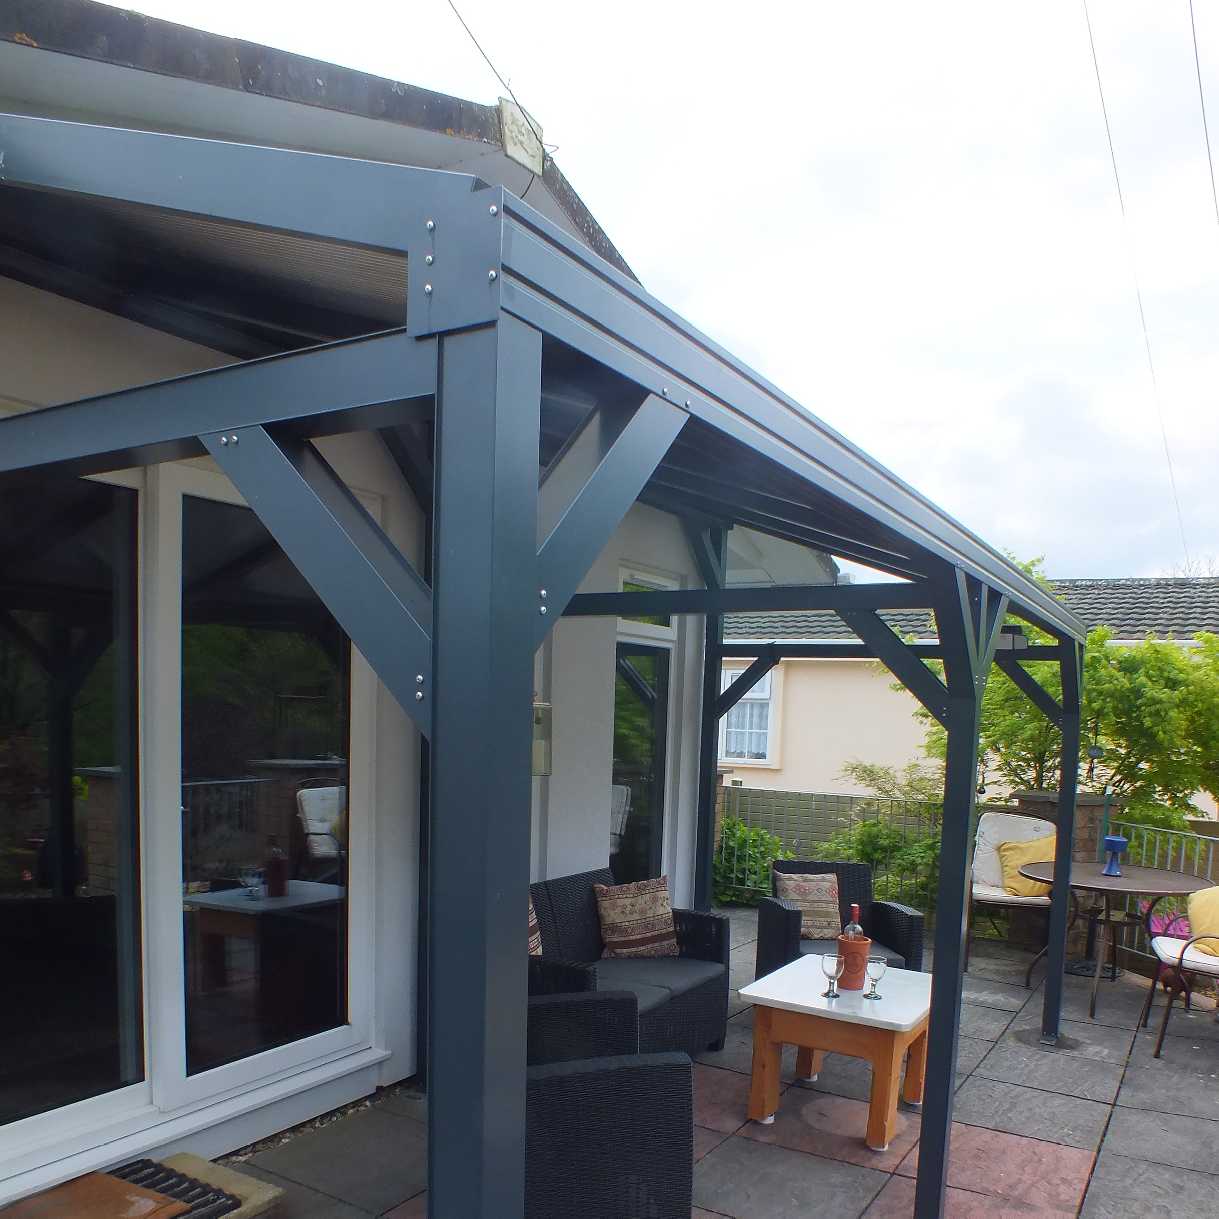 Affordable Omega Smart Free-Standing, Anthracite Grey MonoPitch Roof Canopy with 16mm Polycarbonate Glazing - 5.2m (W) x 2.0m (P), (6) Supporting Posts